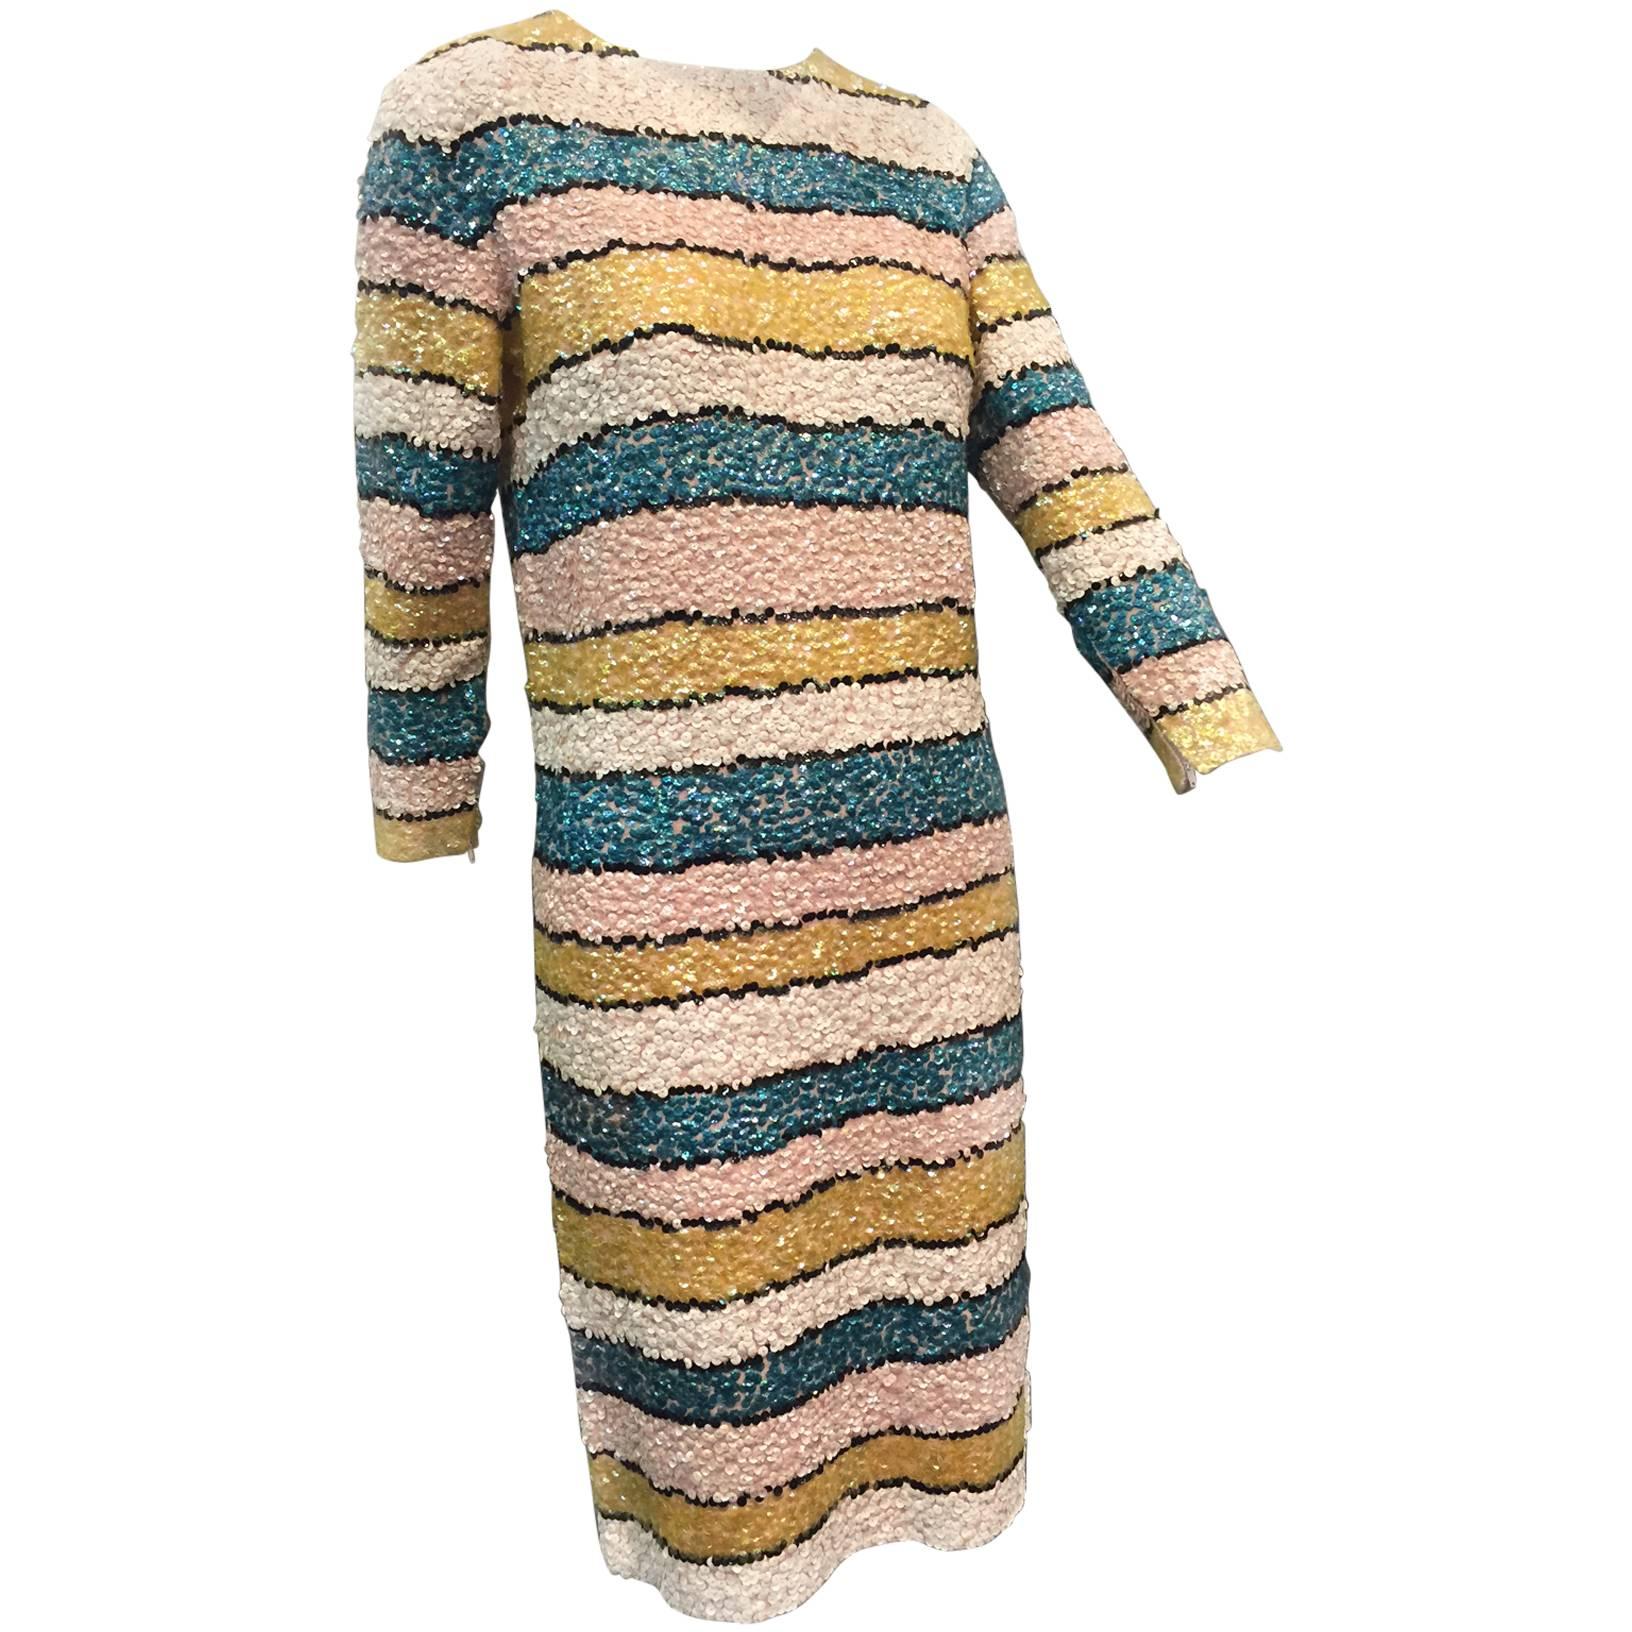 1960s Imperial Wool Knit Striped Sequin Cocktail Dress in Easter Pastels For Sale